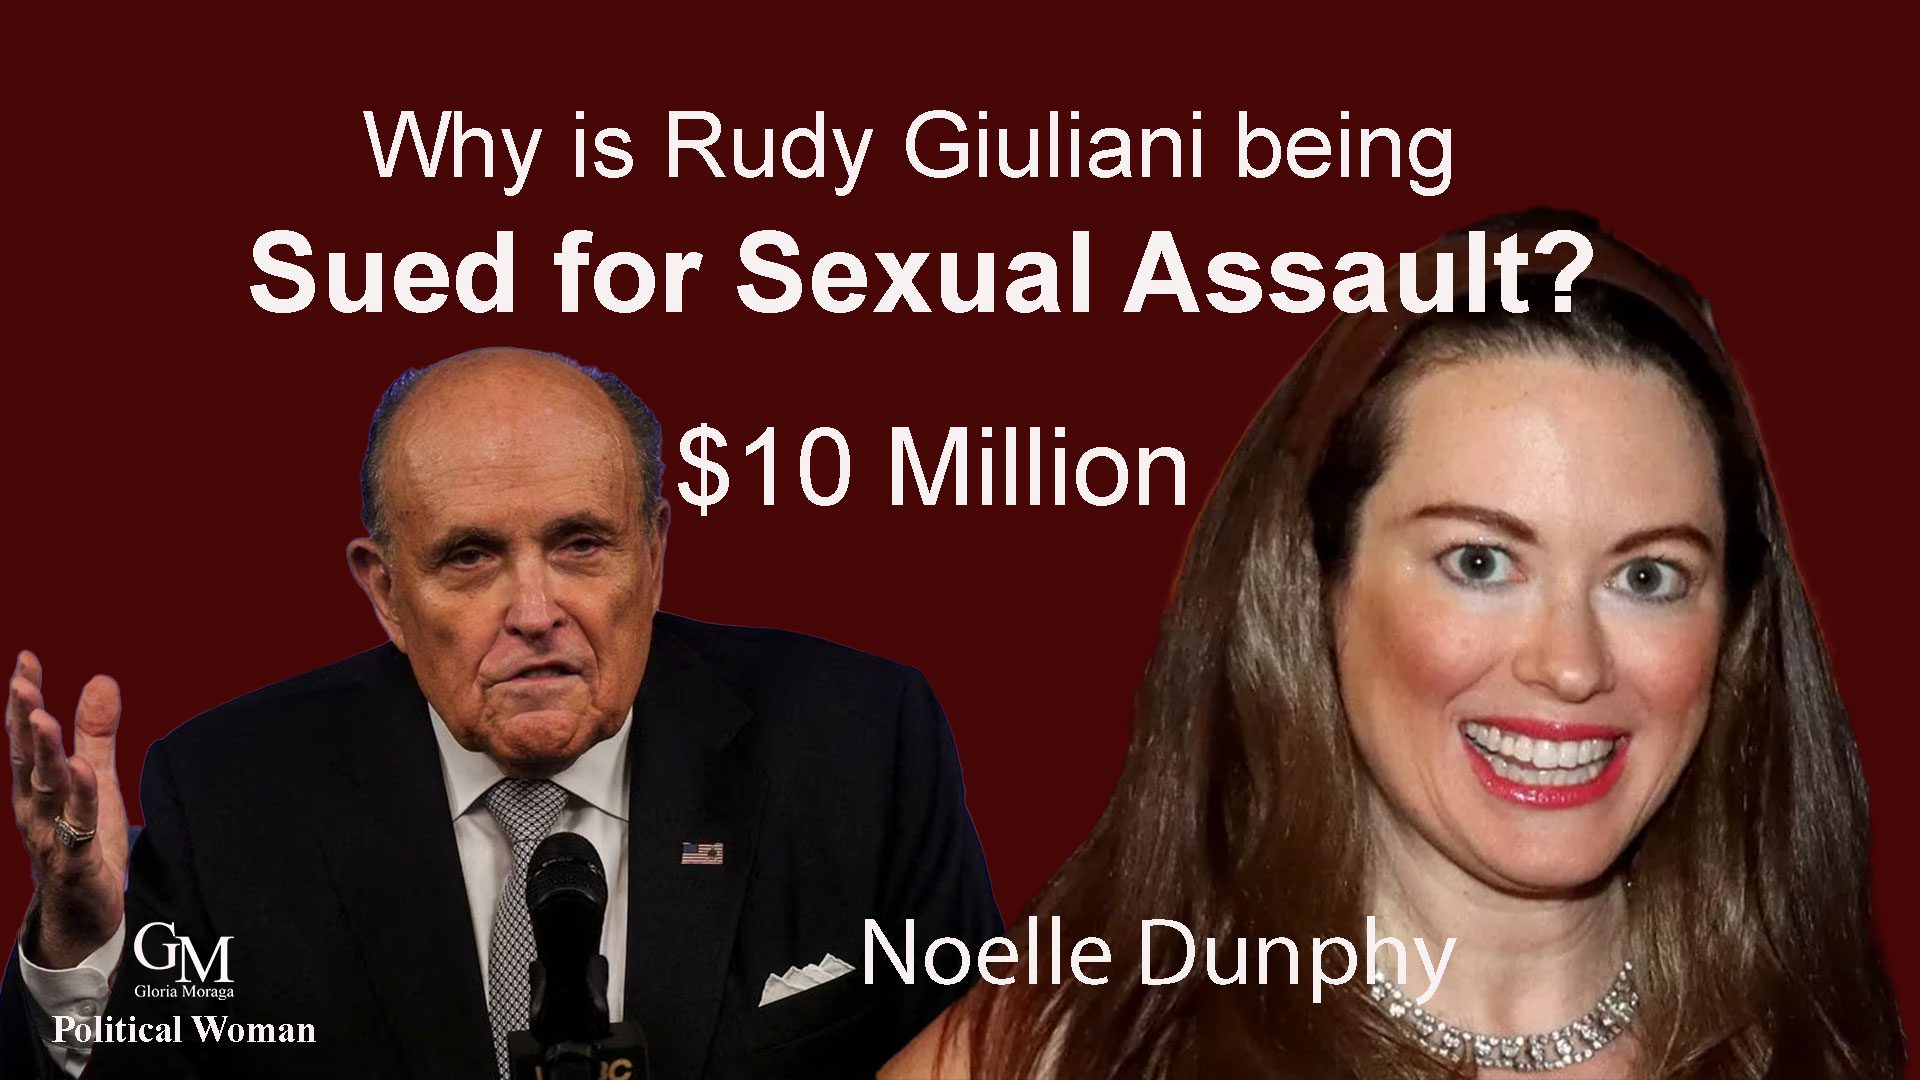 Why is Rudy Giuliani Being Sued for Sexual Assault? $10 Million.